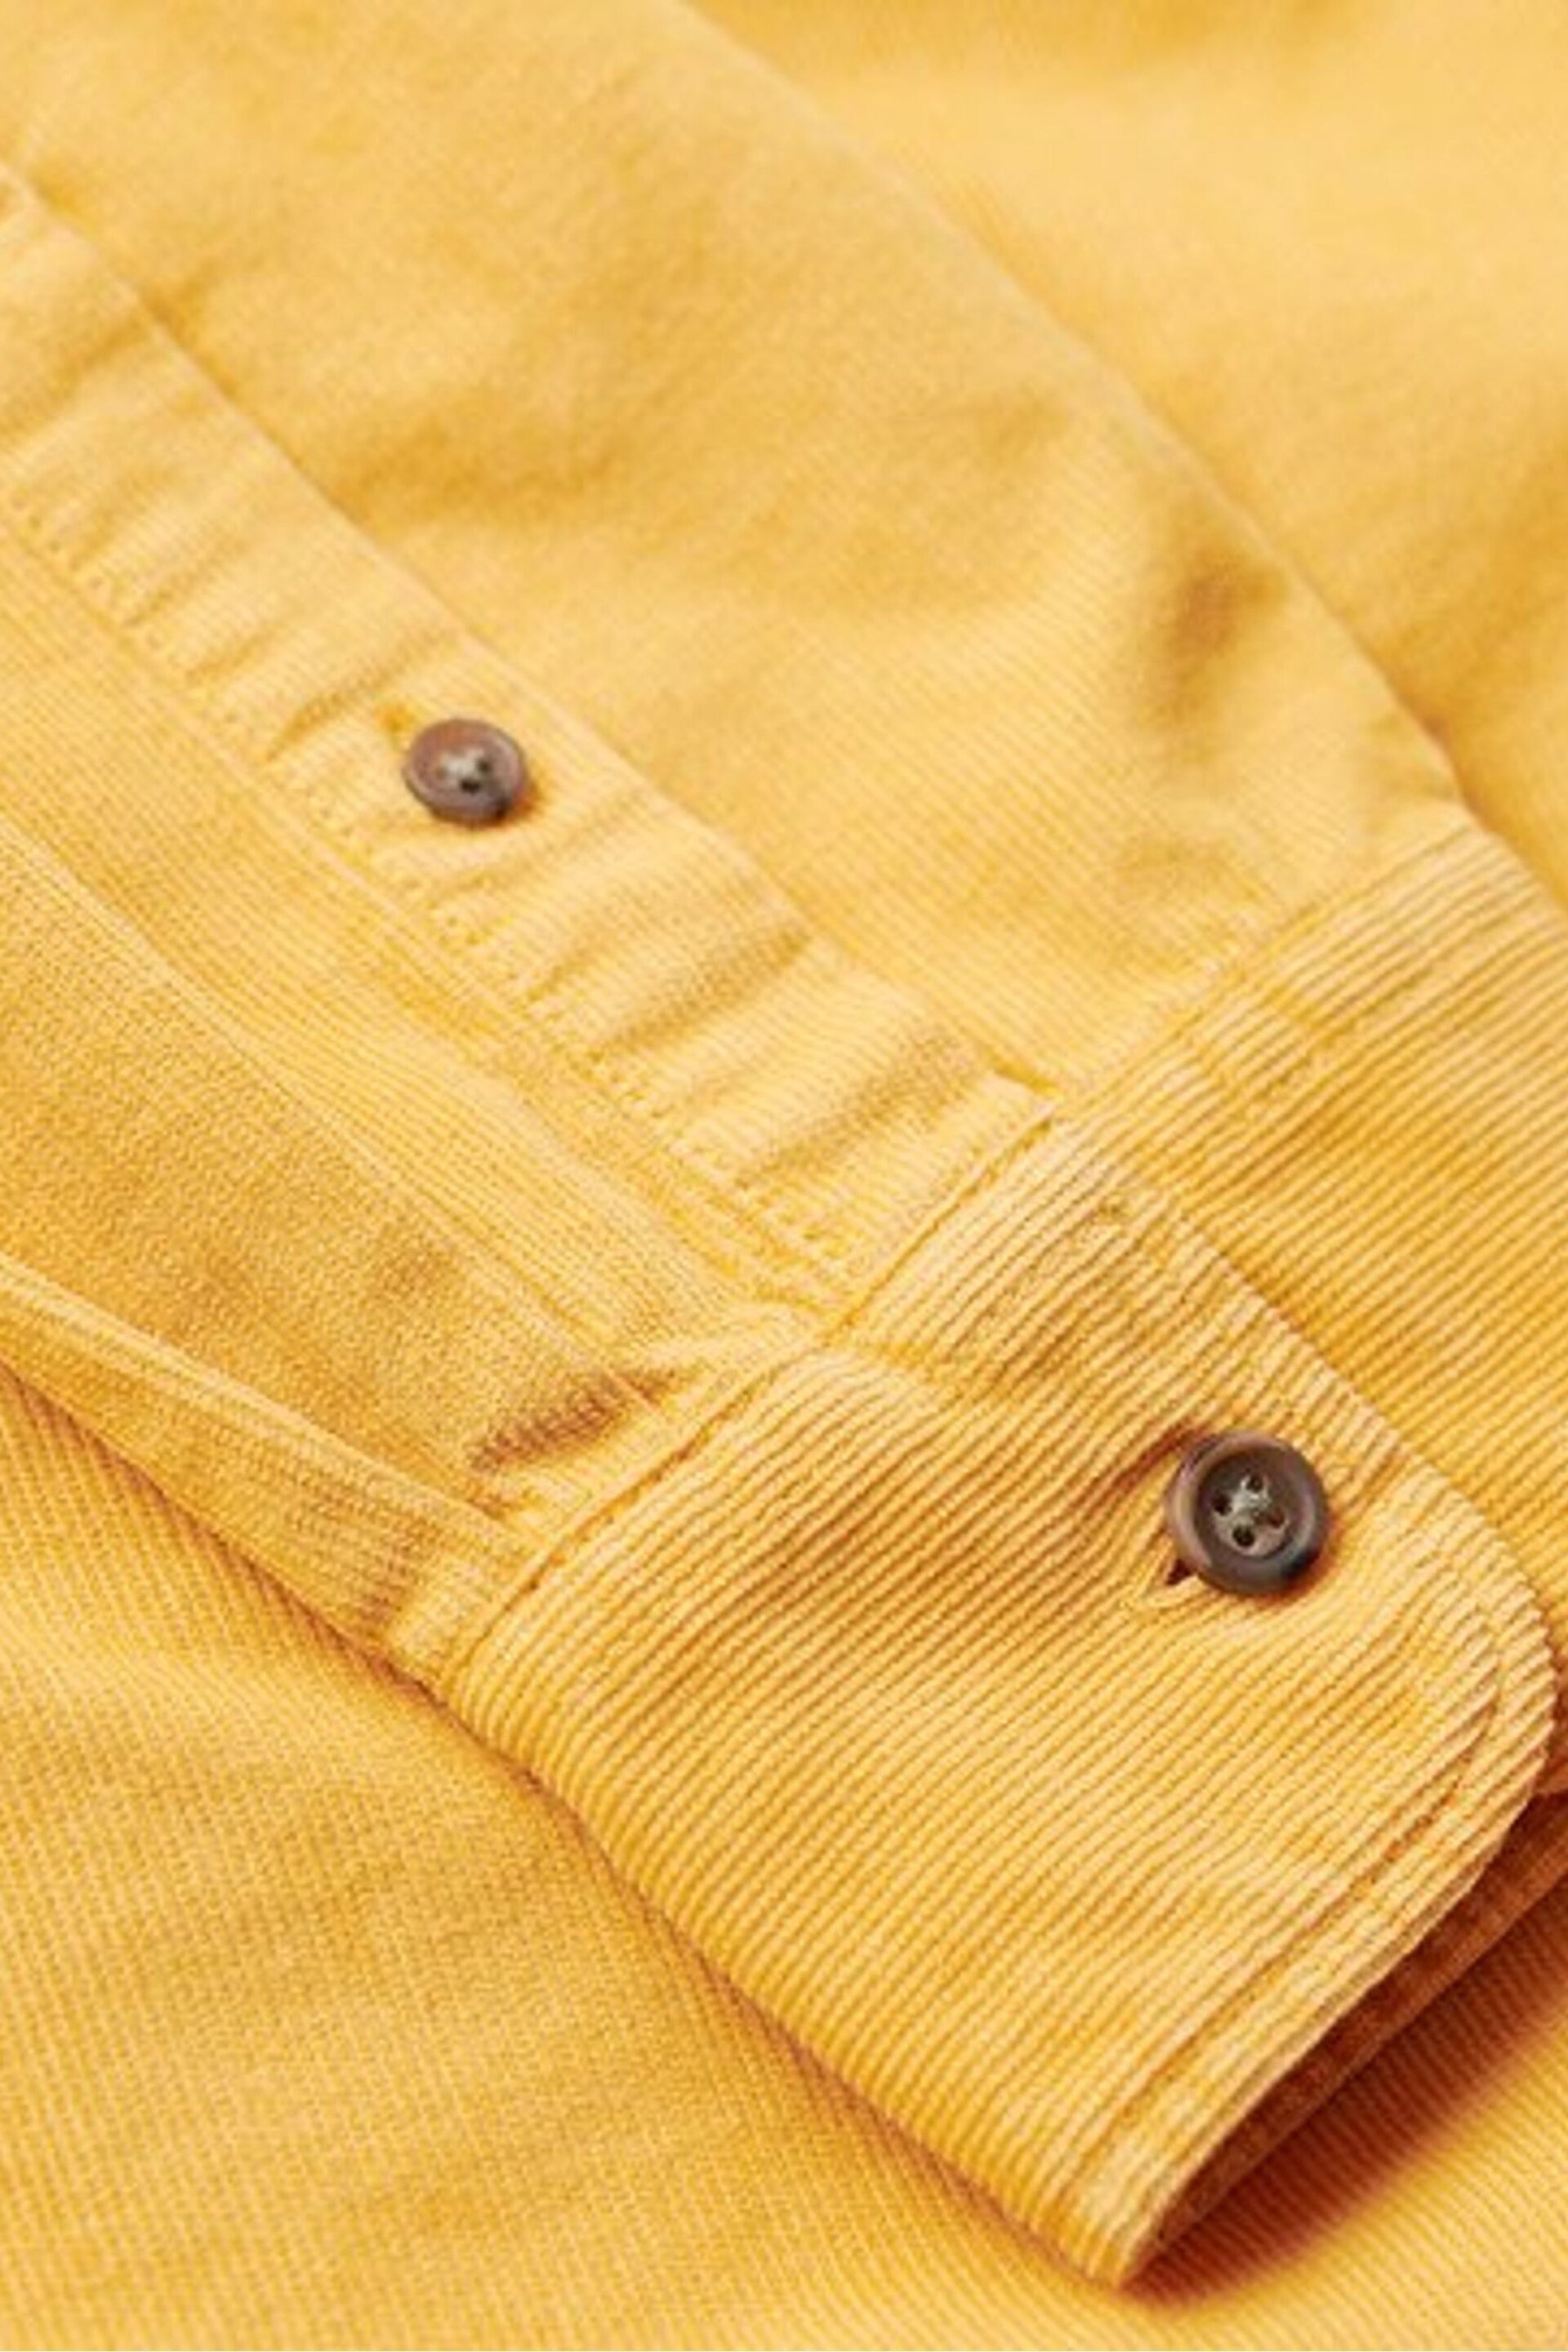 Superdry Yellow Micro Cord Long Sleeve Shirt - Image 6 of 6